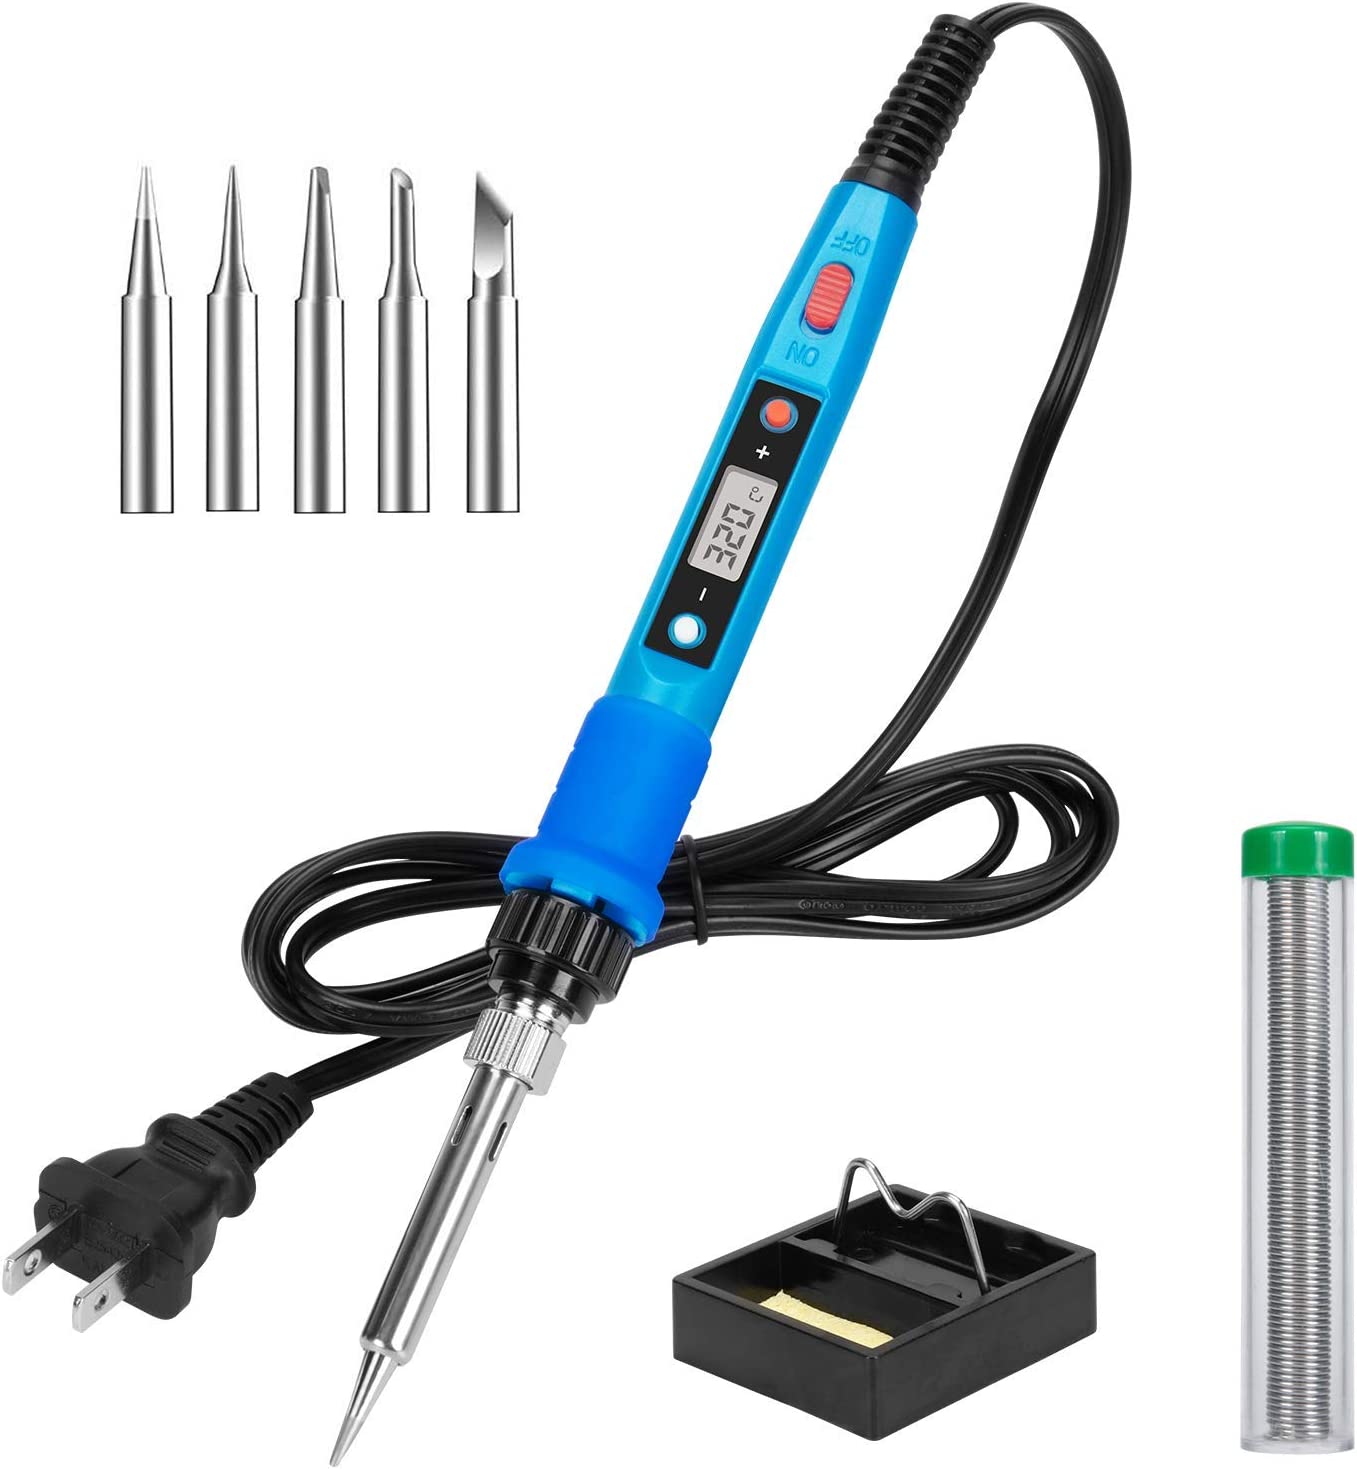 TwoWin Soldering Iron Kit, 80W 110V LCD Digital Soldering Welding Iron Kit with Ceramic Heater, Portable Soldering Kit with 5pcs Tips, Stand, Solder Tube, Sponge, for Metal, Jewelry, Electric, DIY